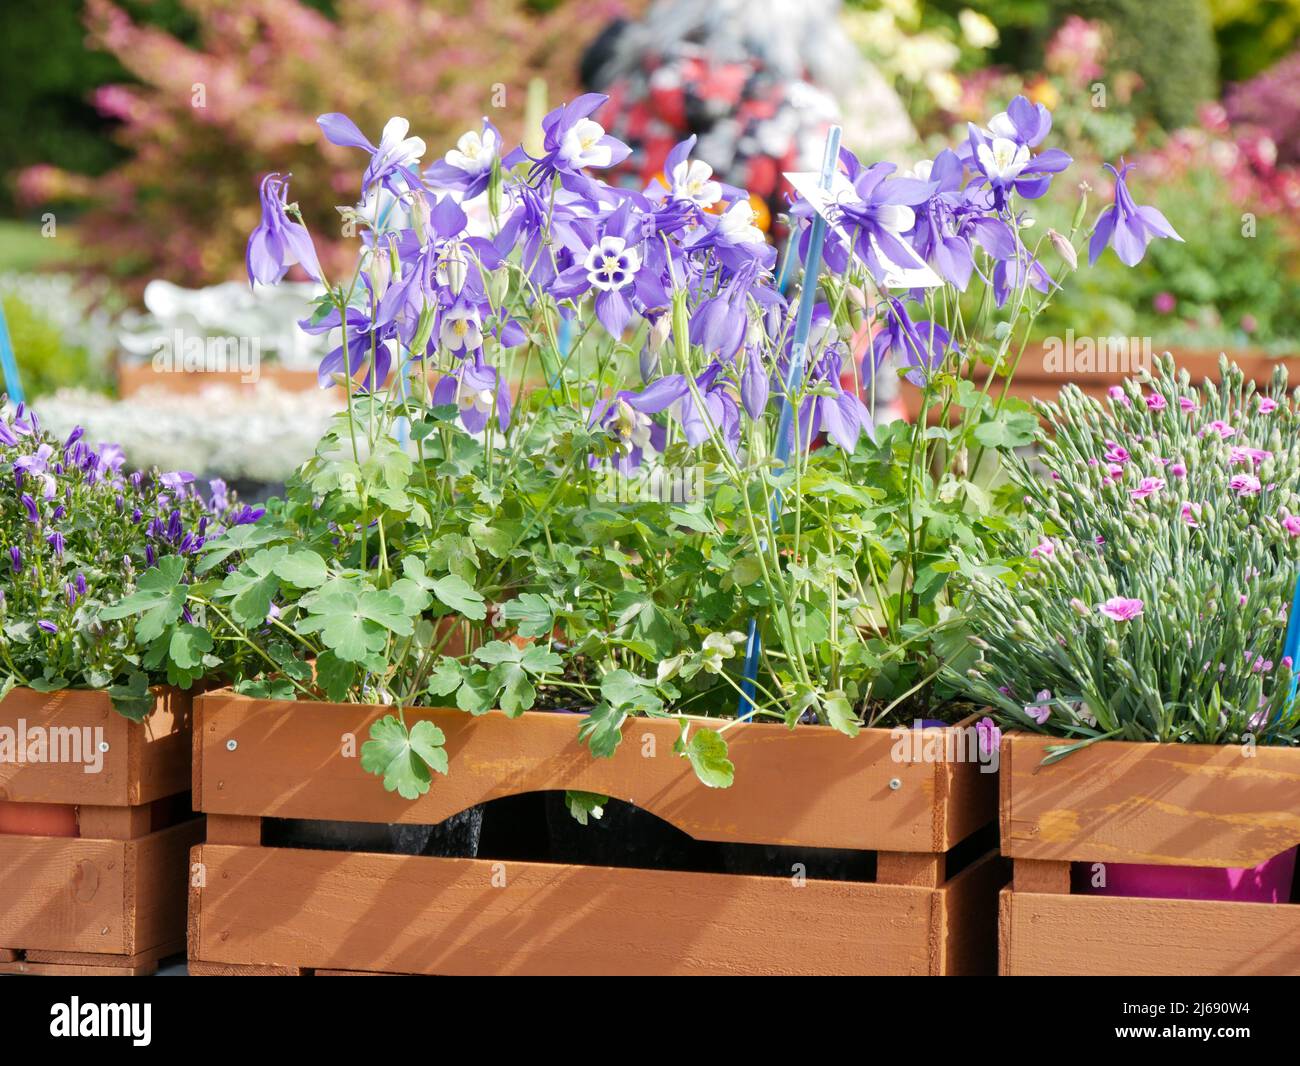 producers selling plants and flowers in the street in a spring city event Stock Photo